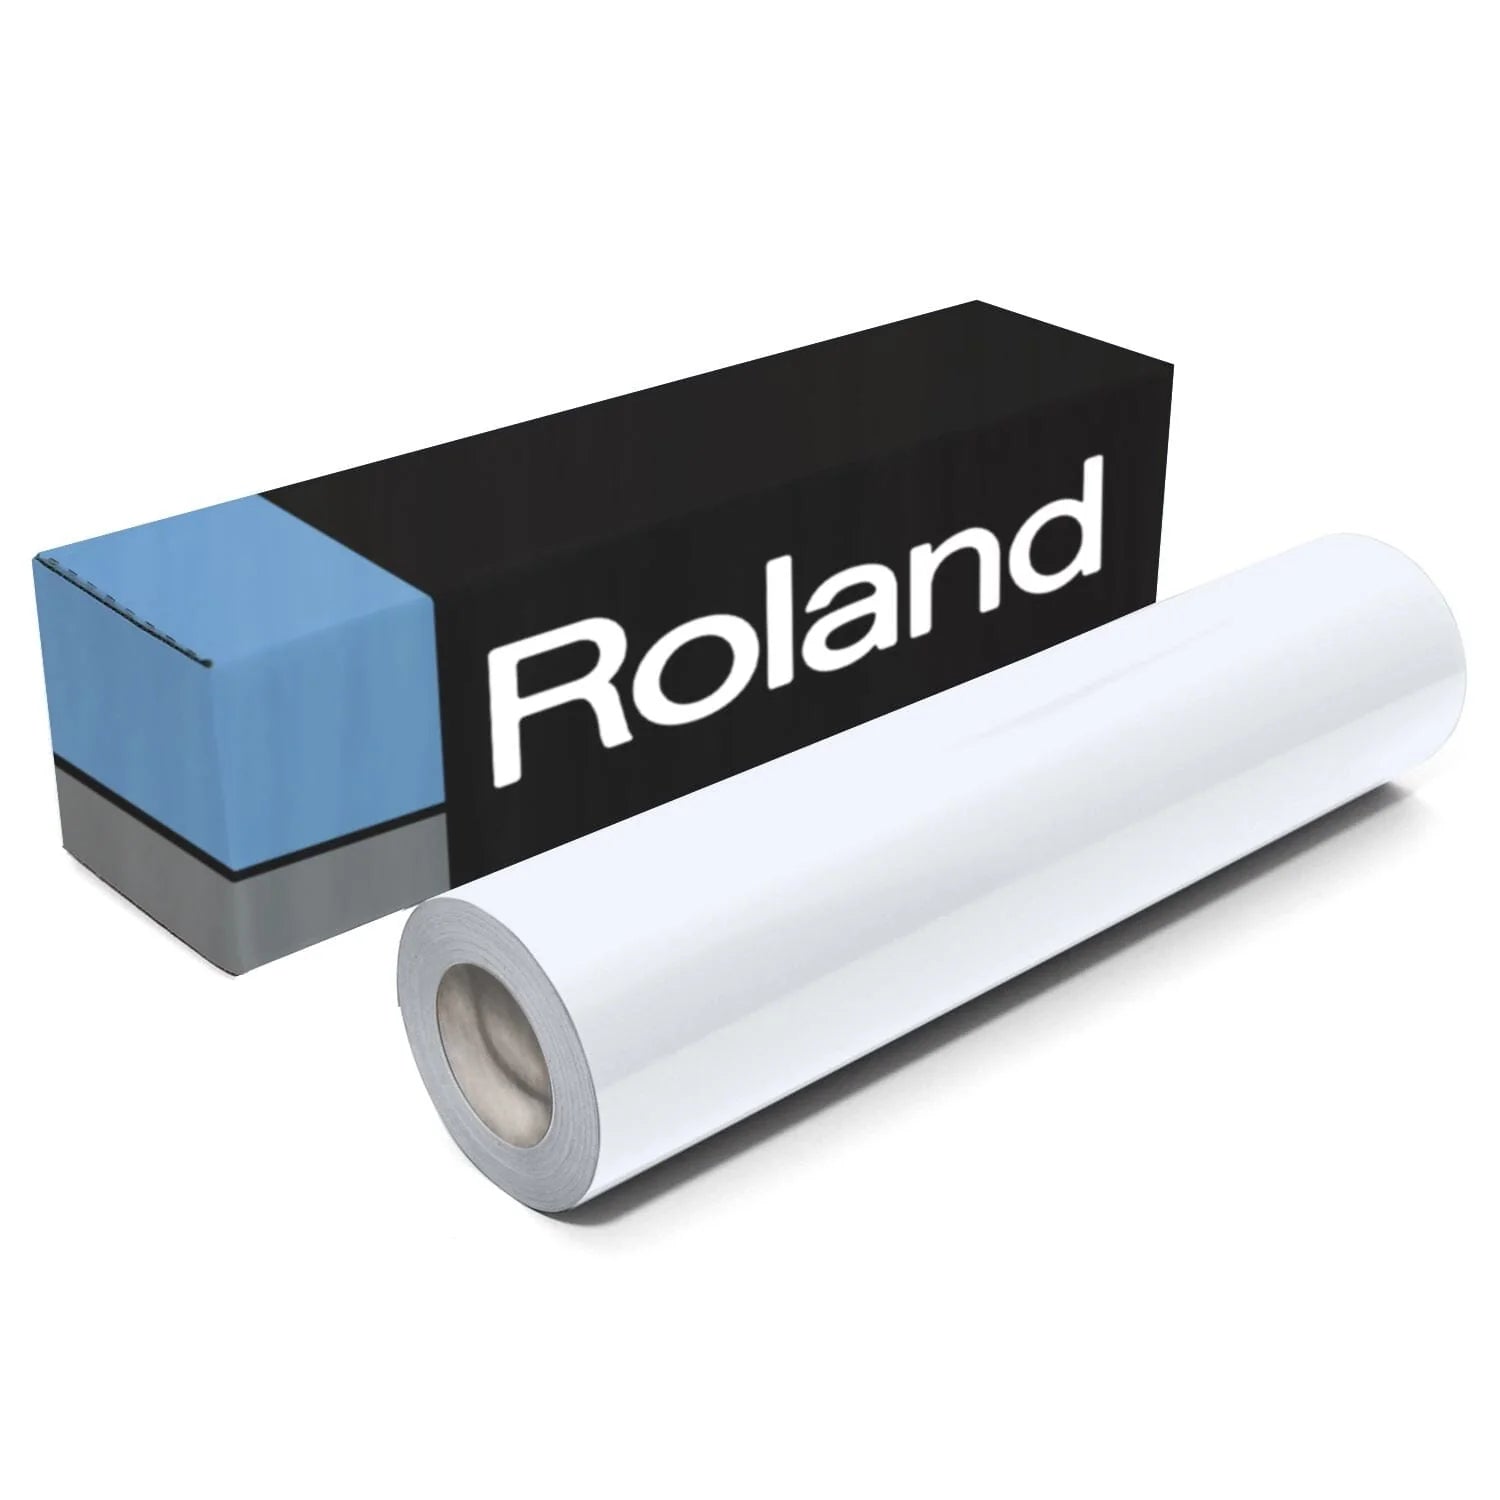 Roll of Roland etched glass vinyl next to box.